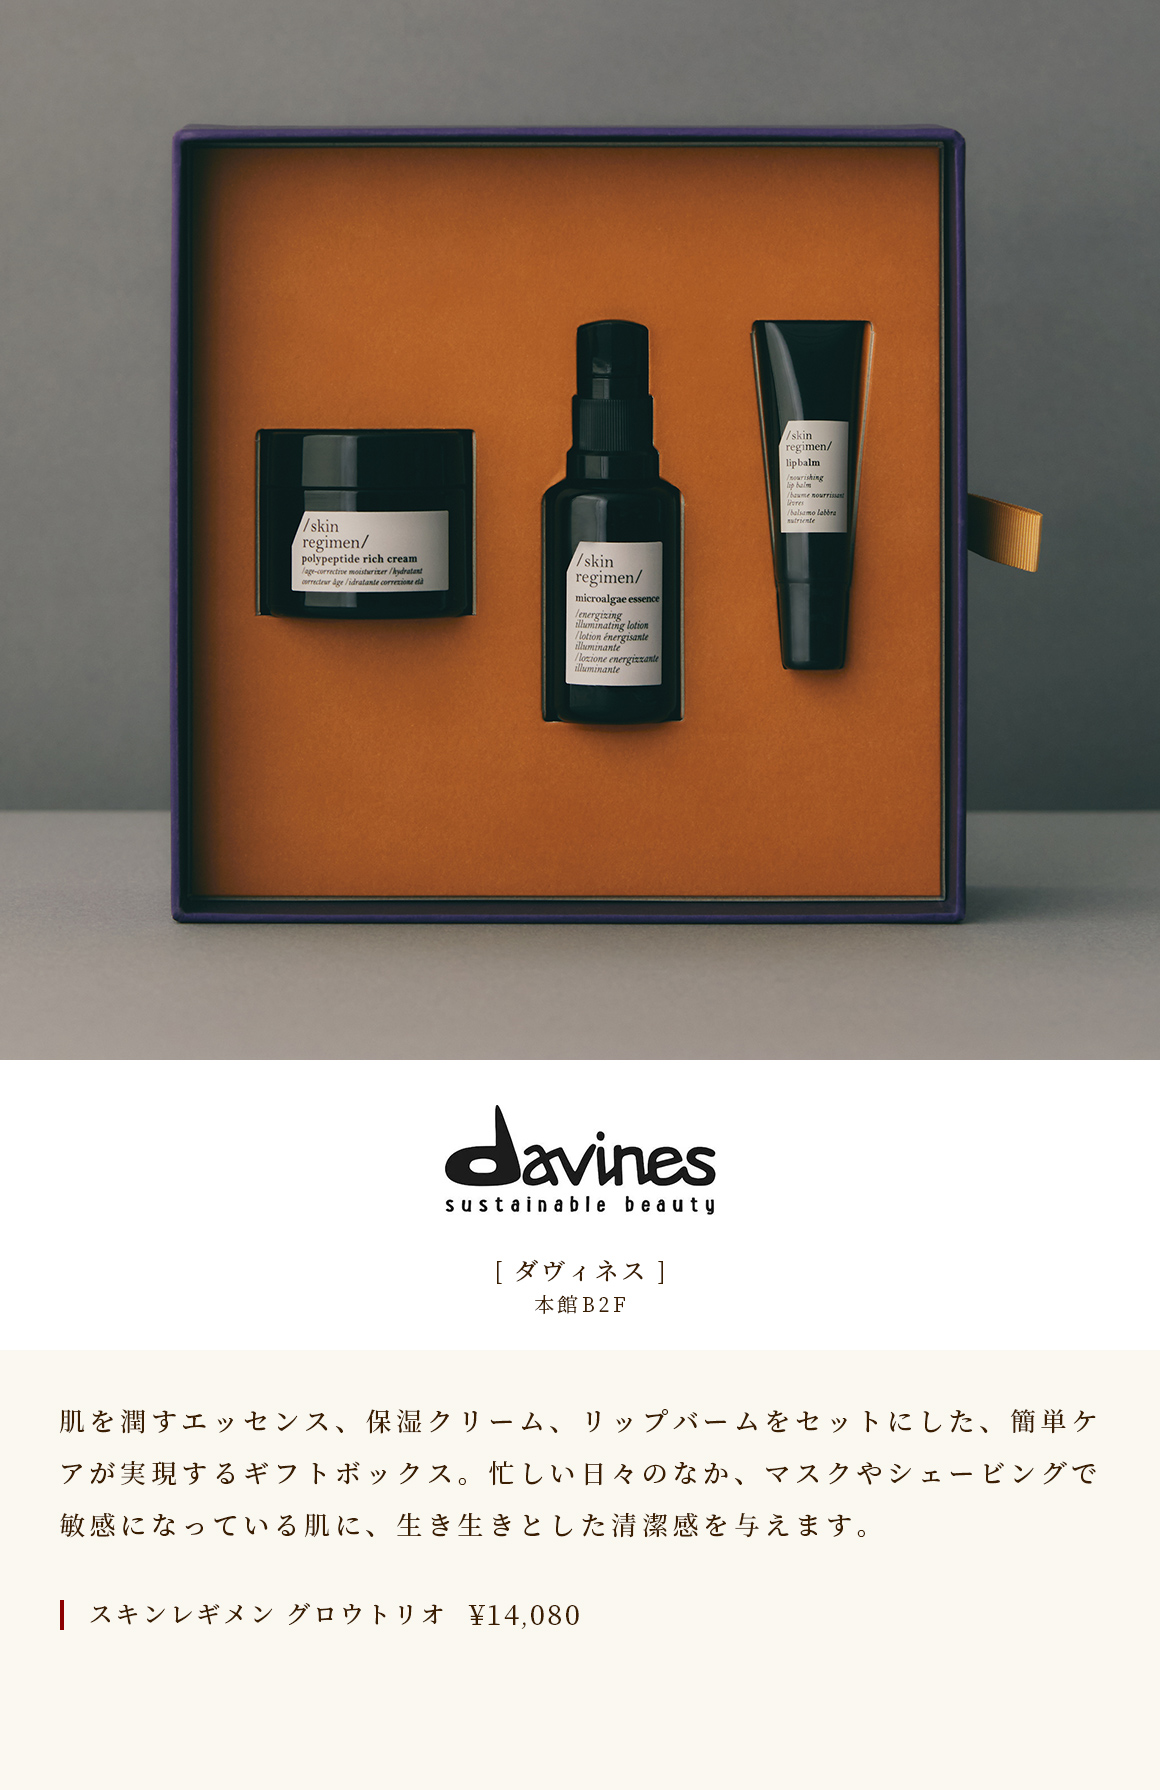 [Davines] Main Building B2F A gift box that provides easy care with a set of essence that moisturizes the skin, moisturizing cream, and lip balm. It gives a lively and clean feeling to the skin that is sensitive to masks and shaving during busy days. Skin Legimen Glow Trio ￥ 14,080